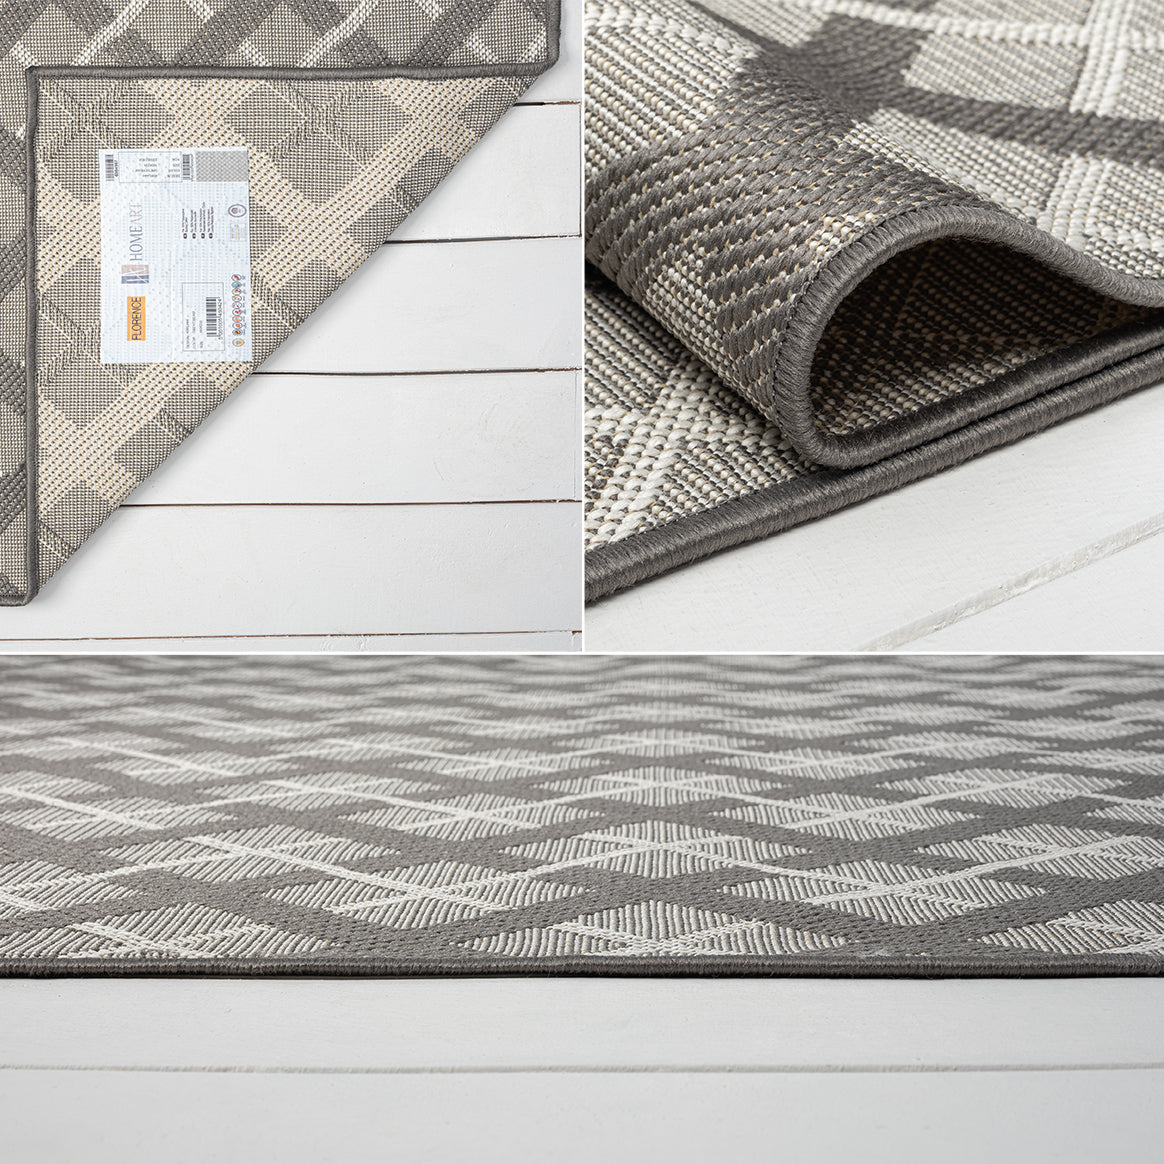 Outdoor Rugs Lined Collection Grey Cream